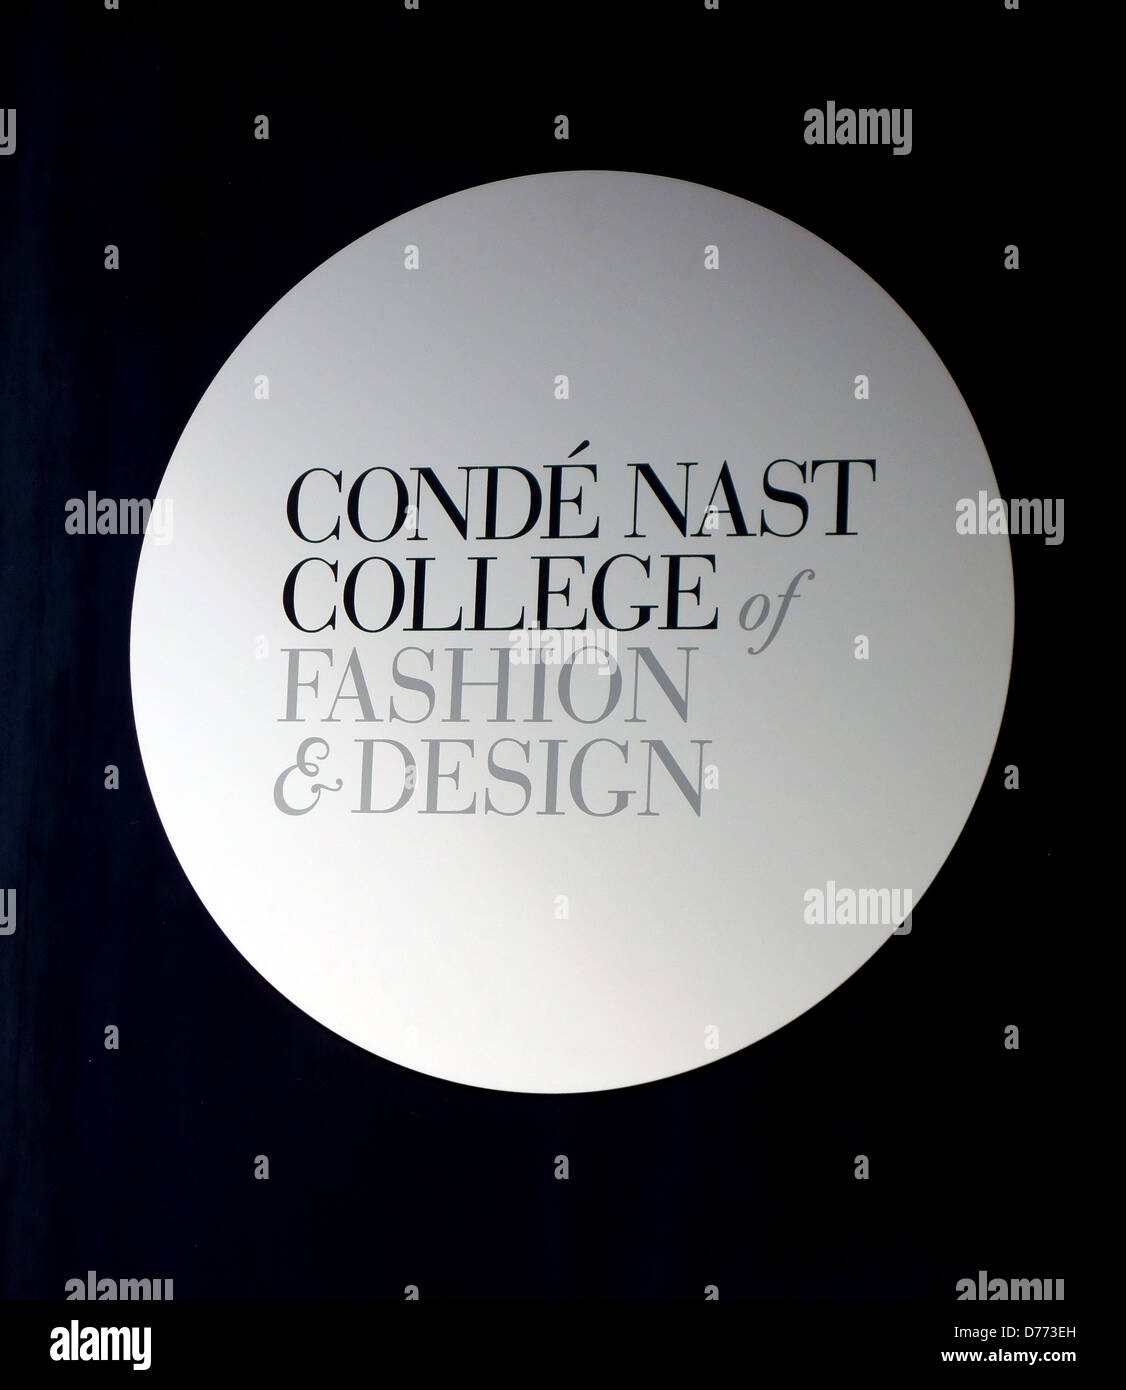 Conde Nast College of Fashion and Design, Soho, London Stock Photo